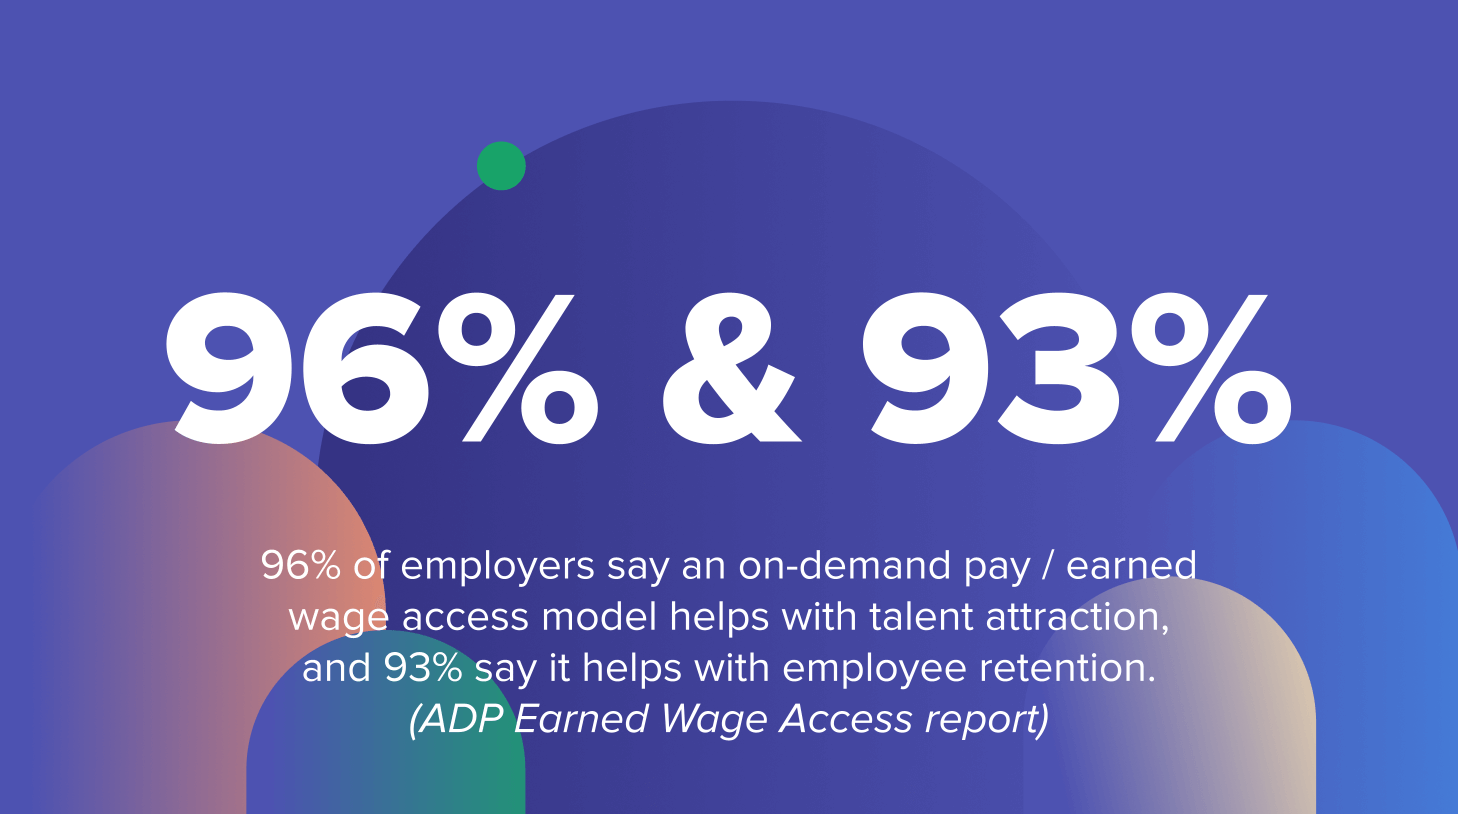 96% of employers say an on-demand pay / earned wage access model helps with talent attraction, and 93% say it helps with employee retention.